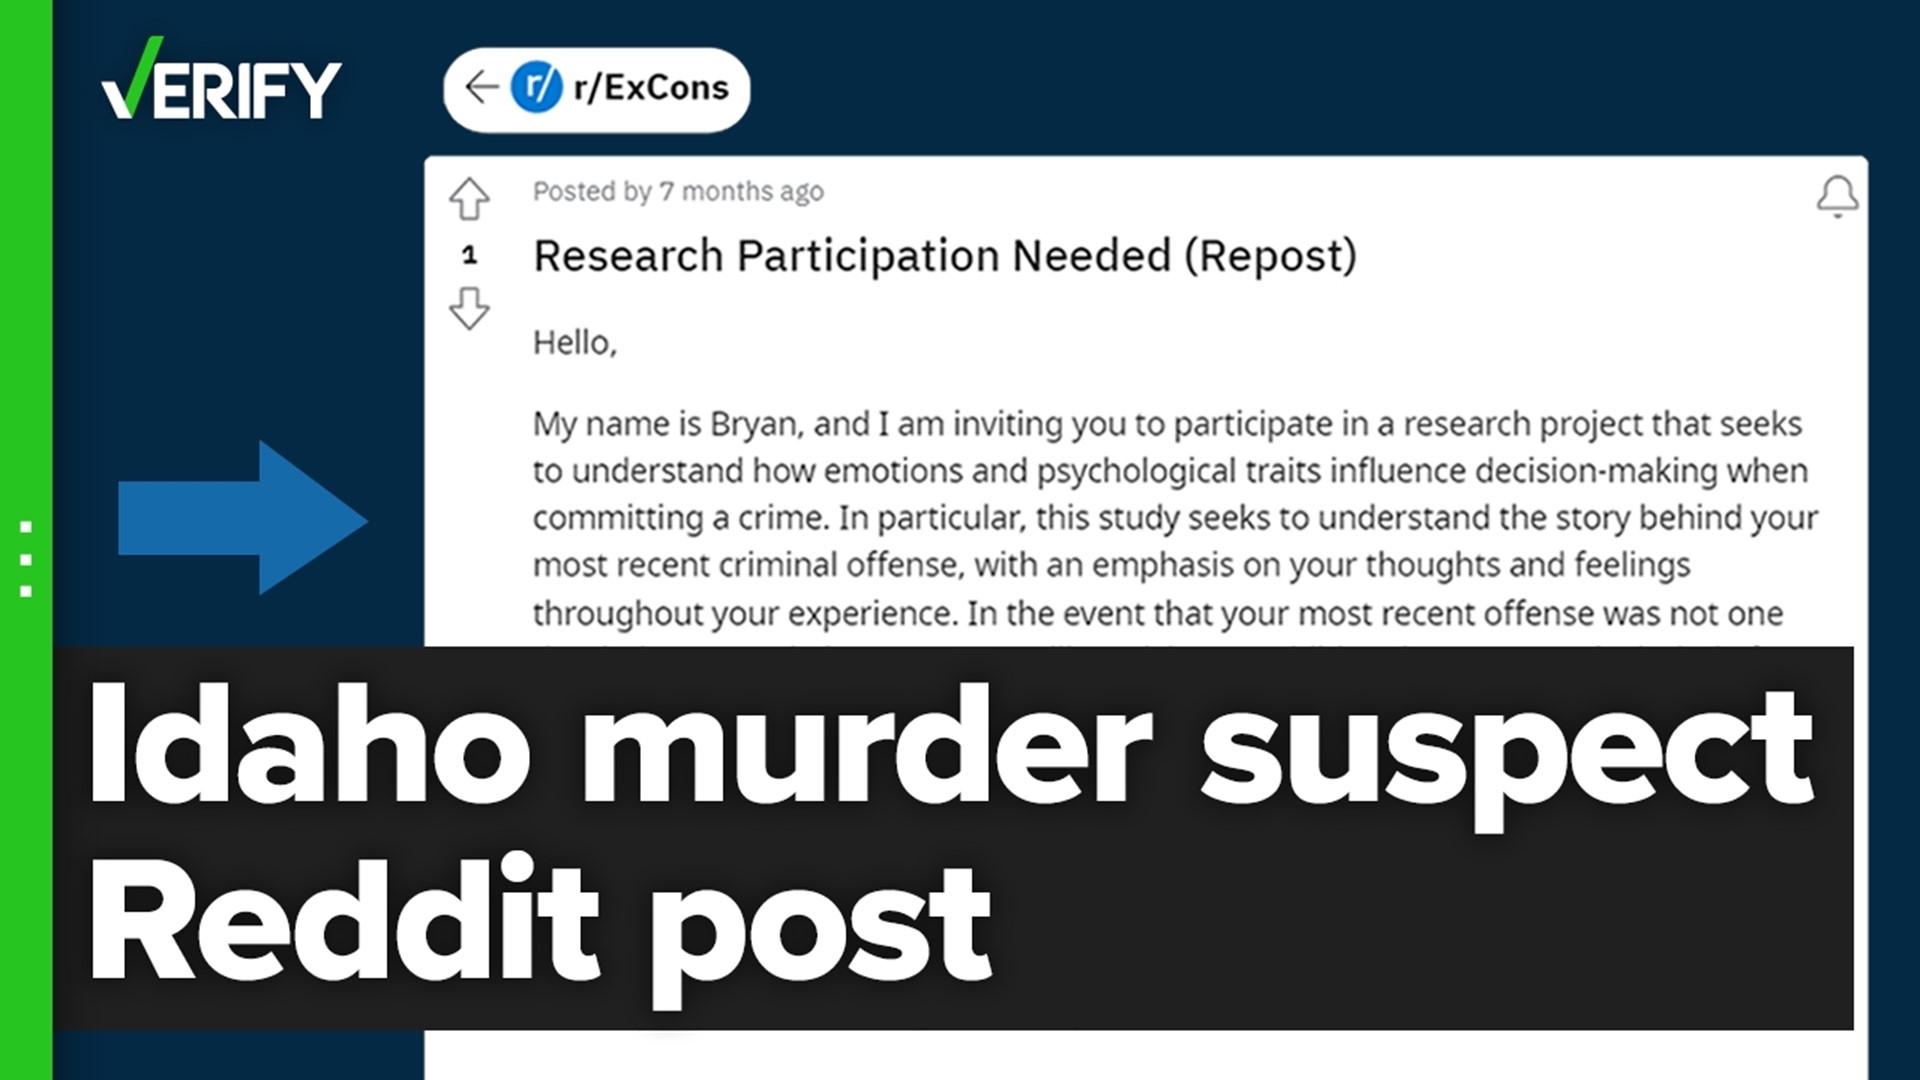 Moscow, Idaho stabbing suspect Bryan Kohberger posted to Reddit for a DeSales University research project about committing crime.